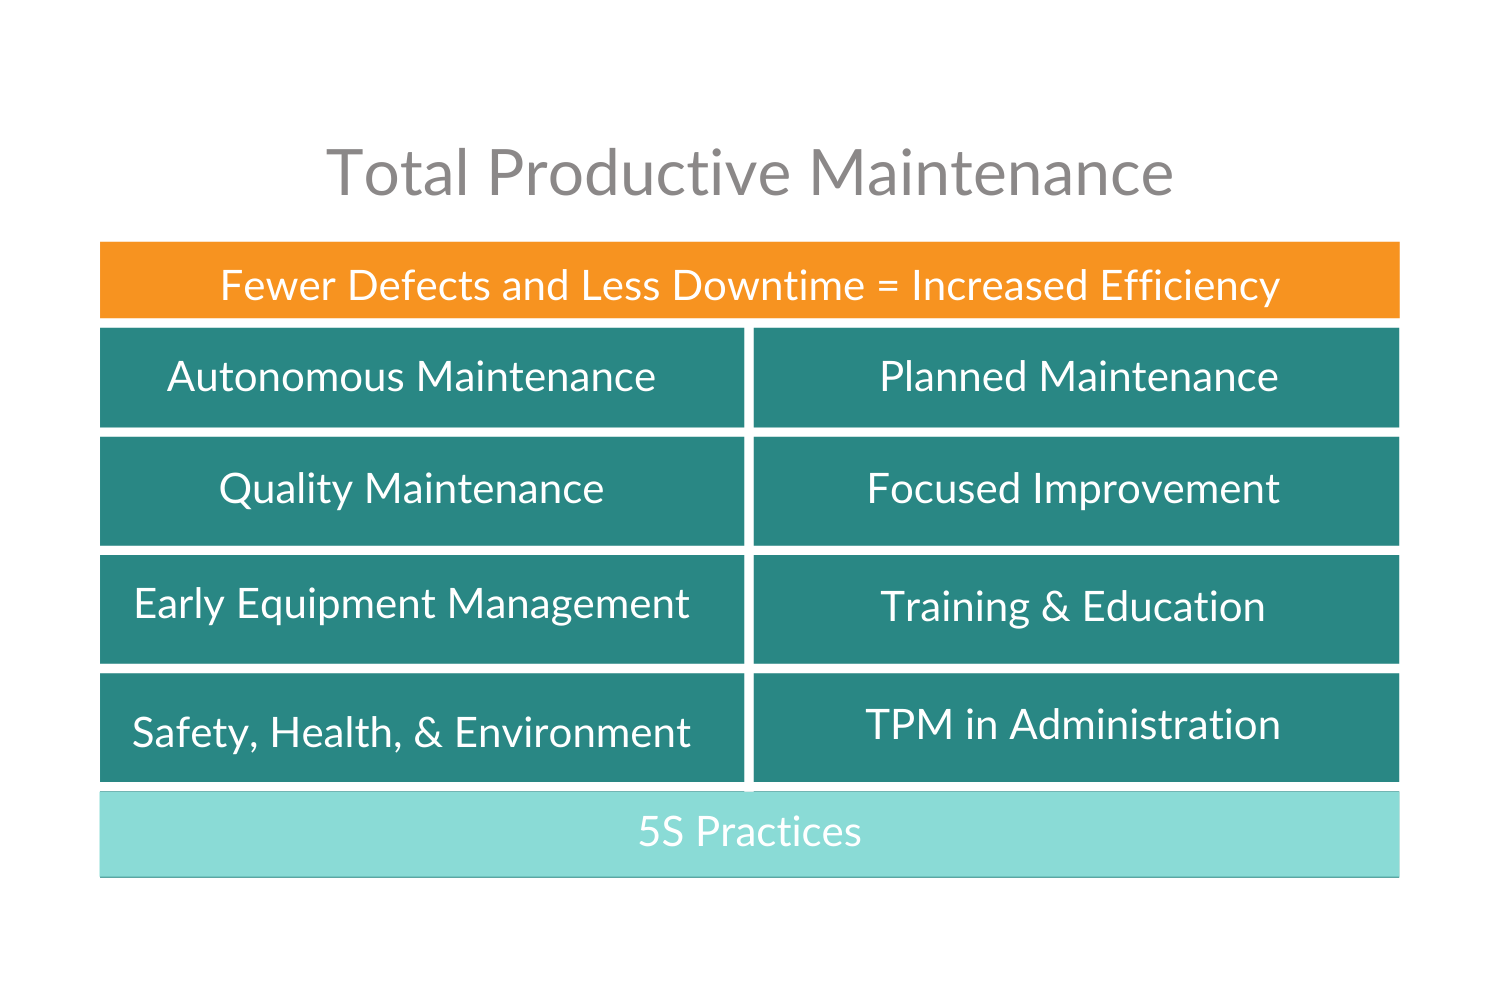 Fewer Defects and Less Downtime = Increased Efficiency